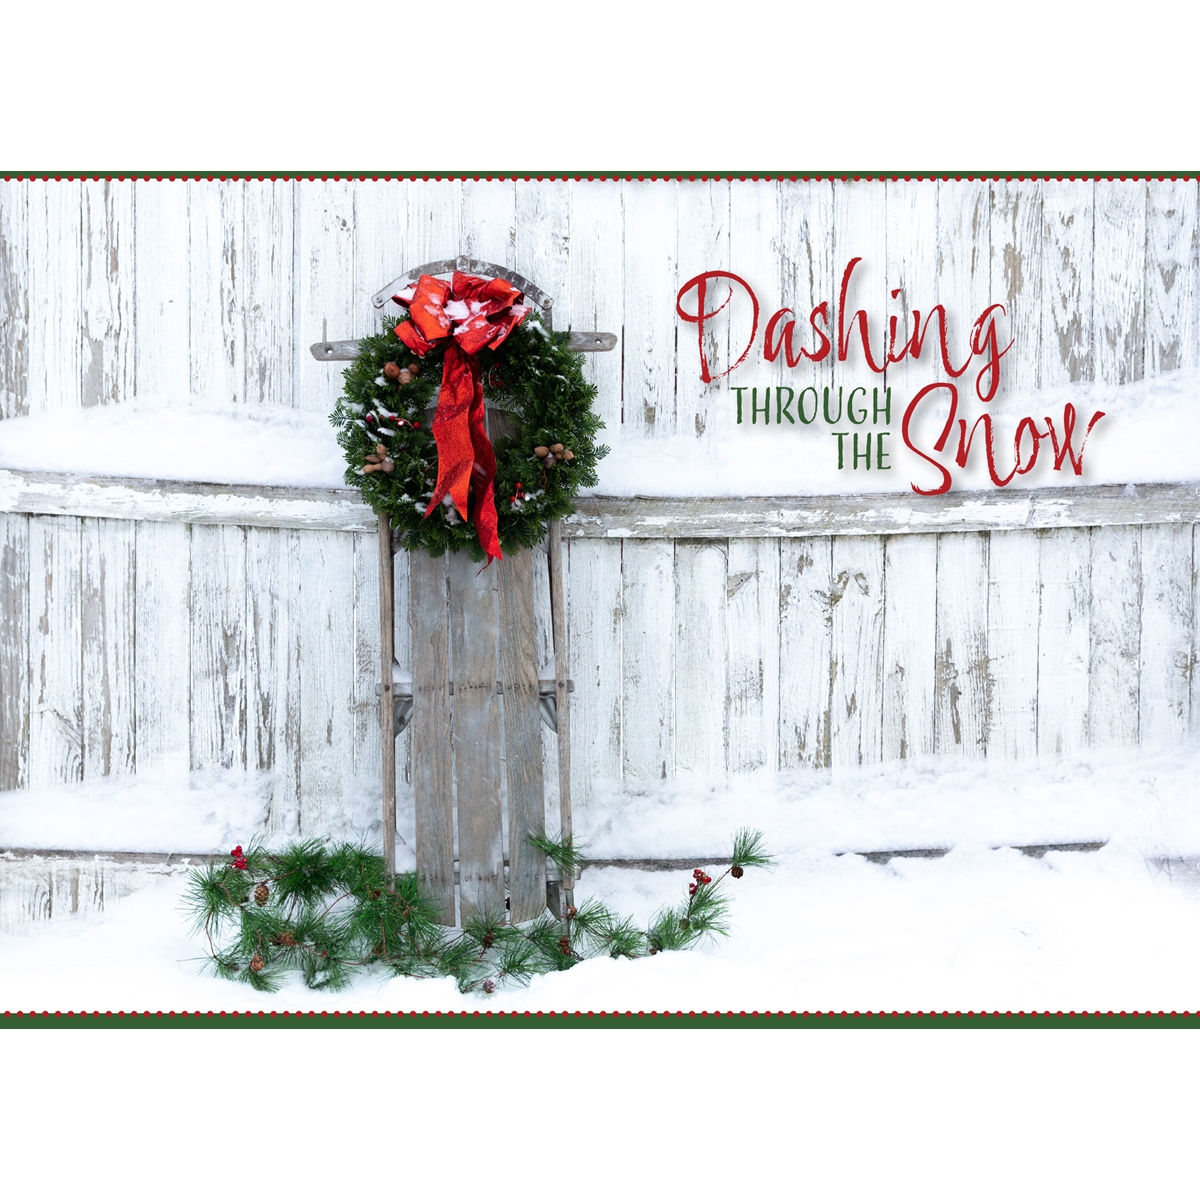 Winter Sled with Wreath Cards - Personalized ($9.00 Fee Included)